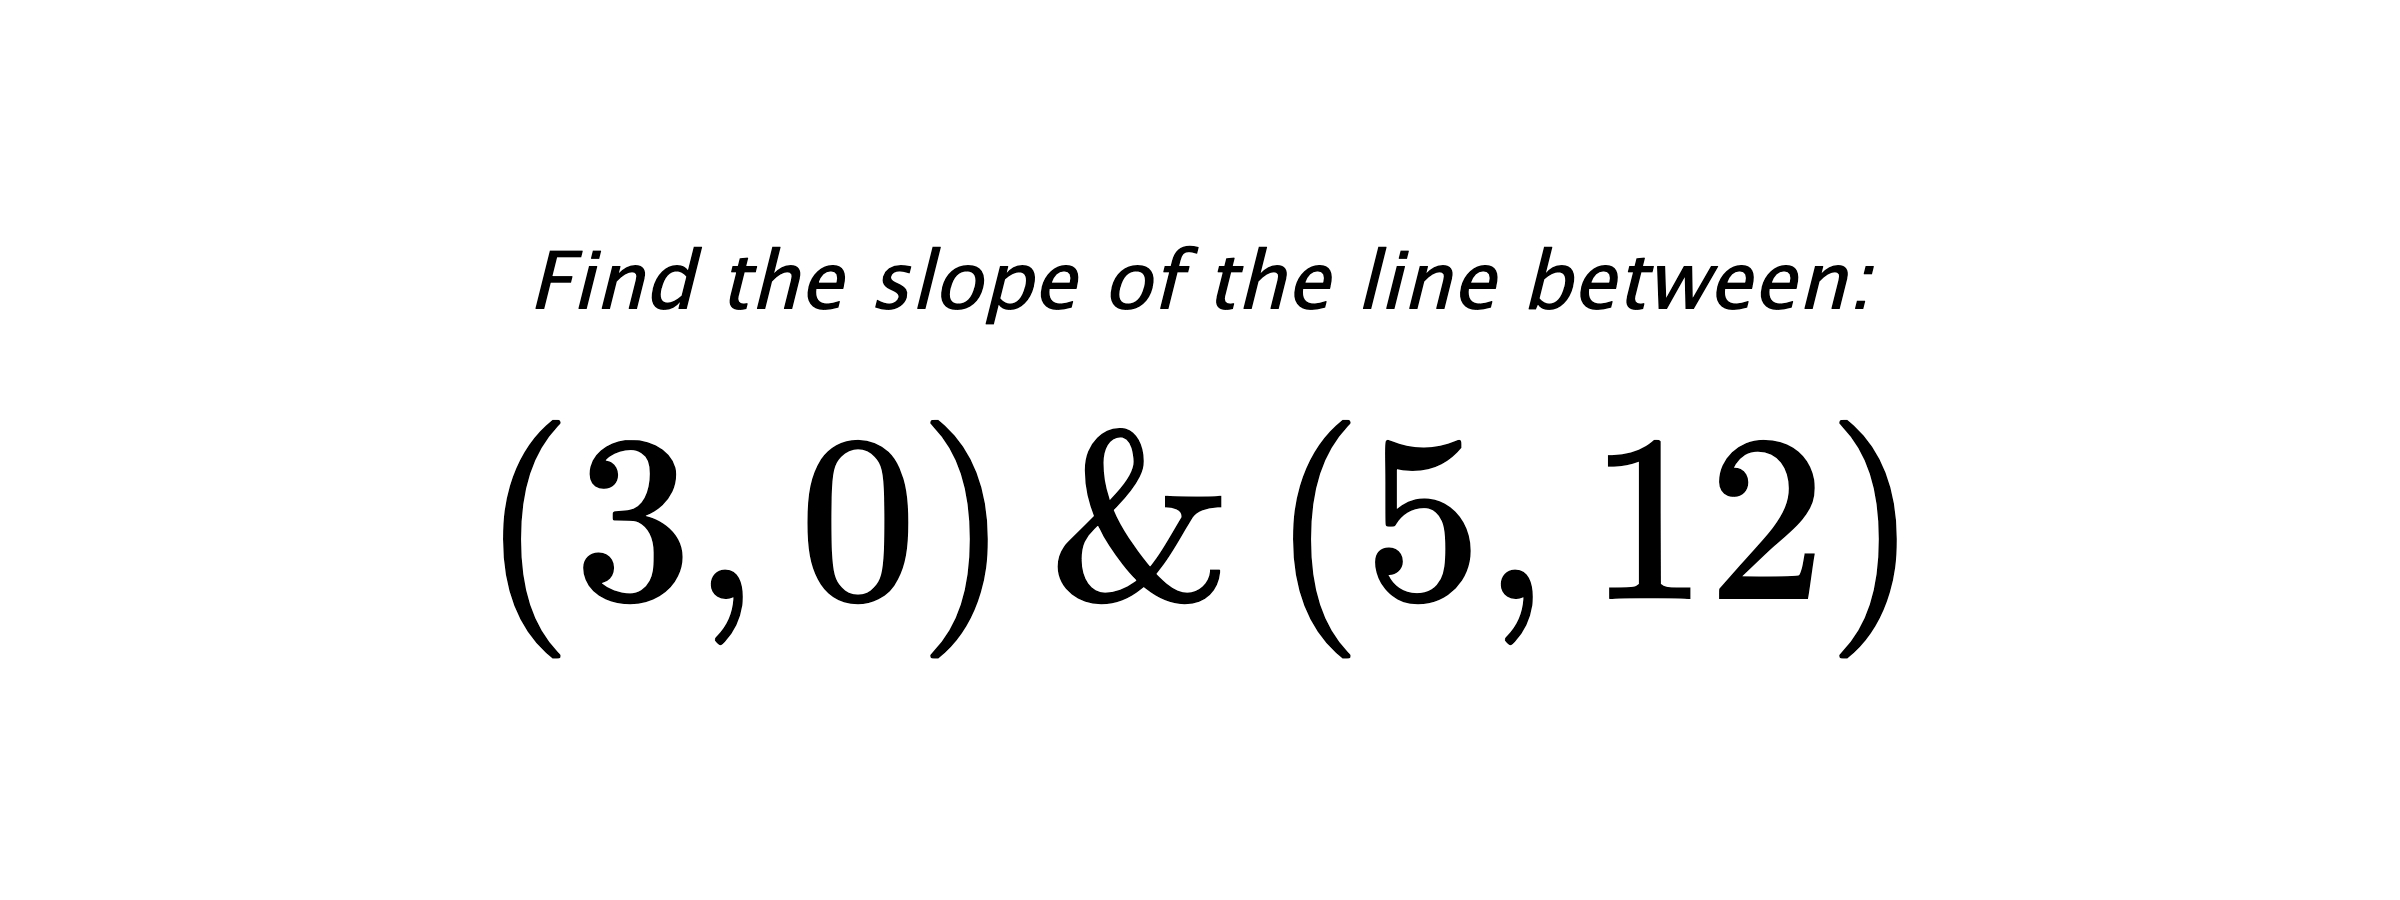 Find the slope of the line between: $ (3,0) \hspace{0.5cm} \text{&} \hspace{0.5cm} (5,12) $